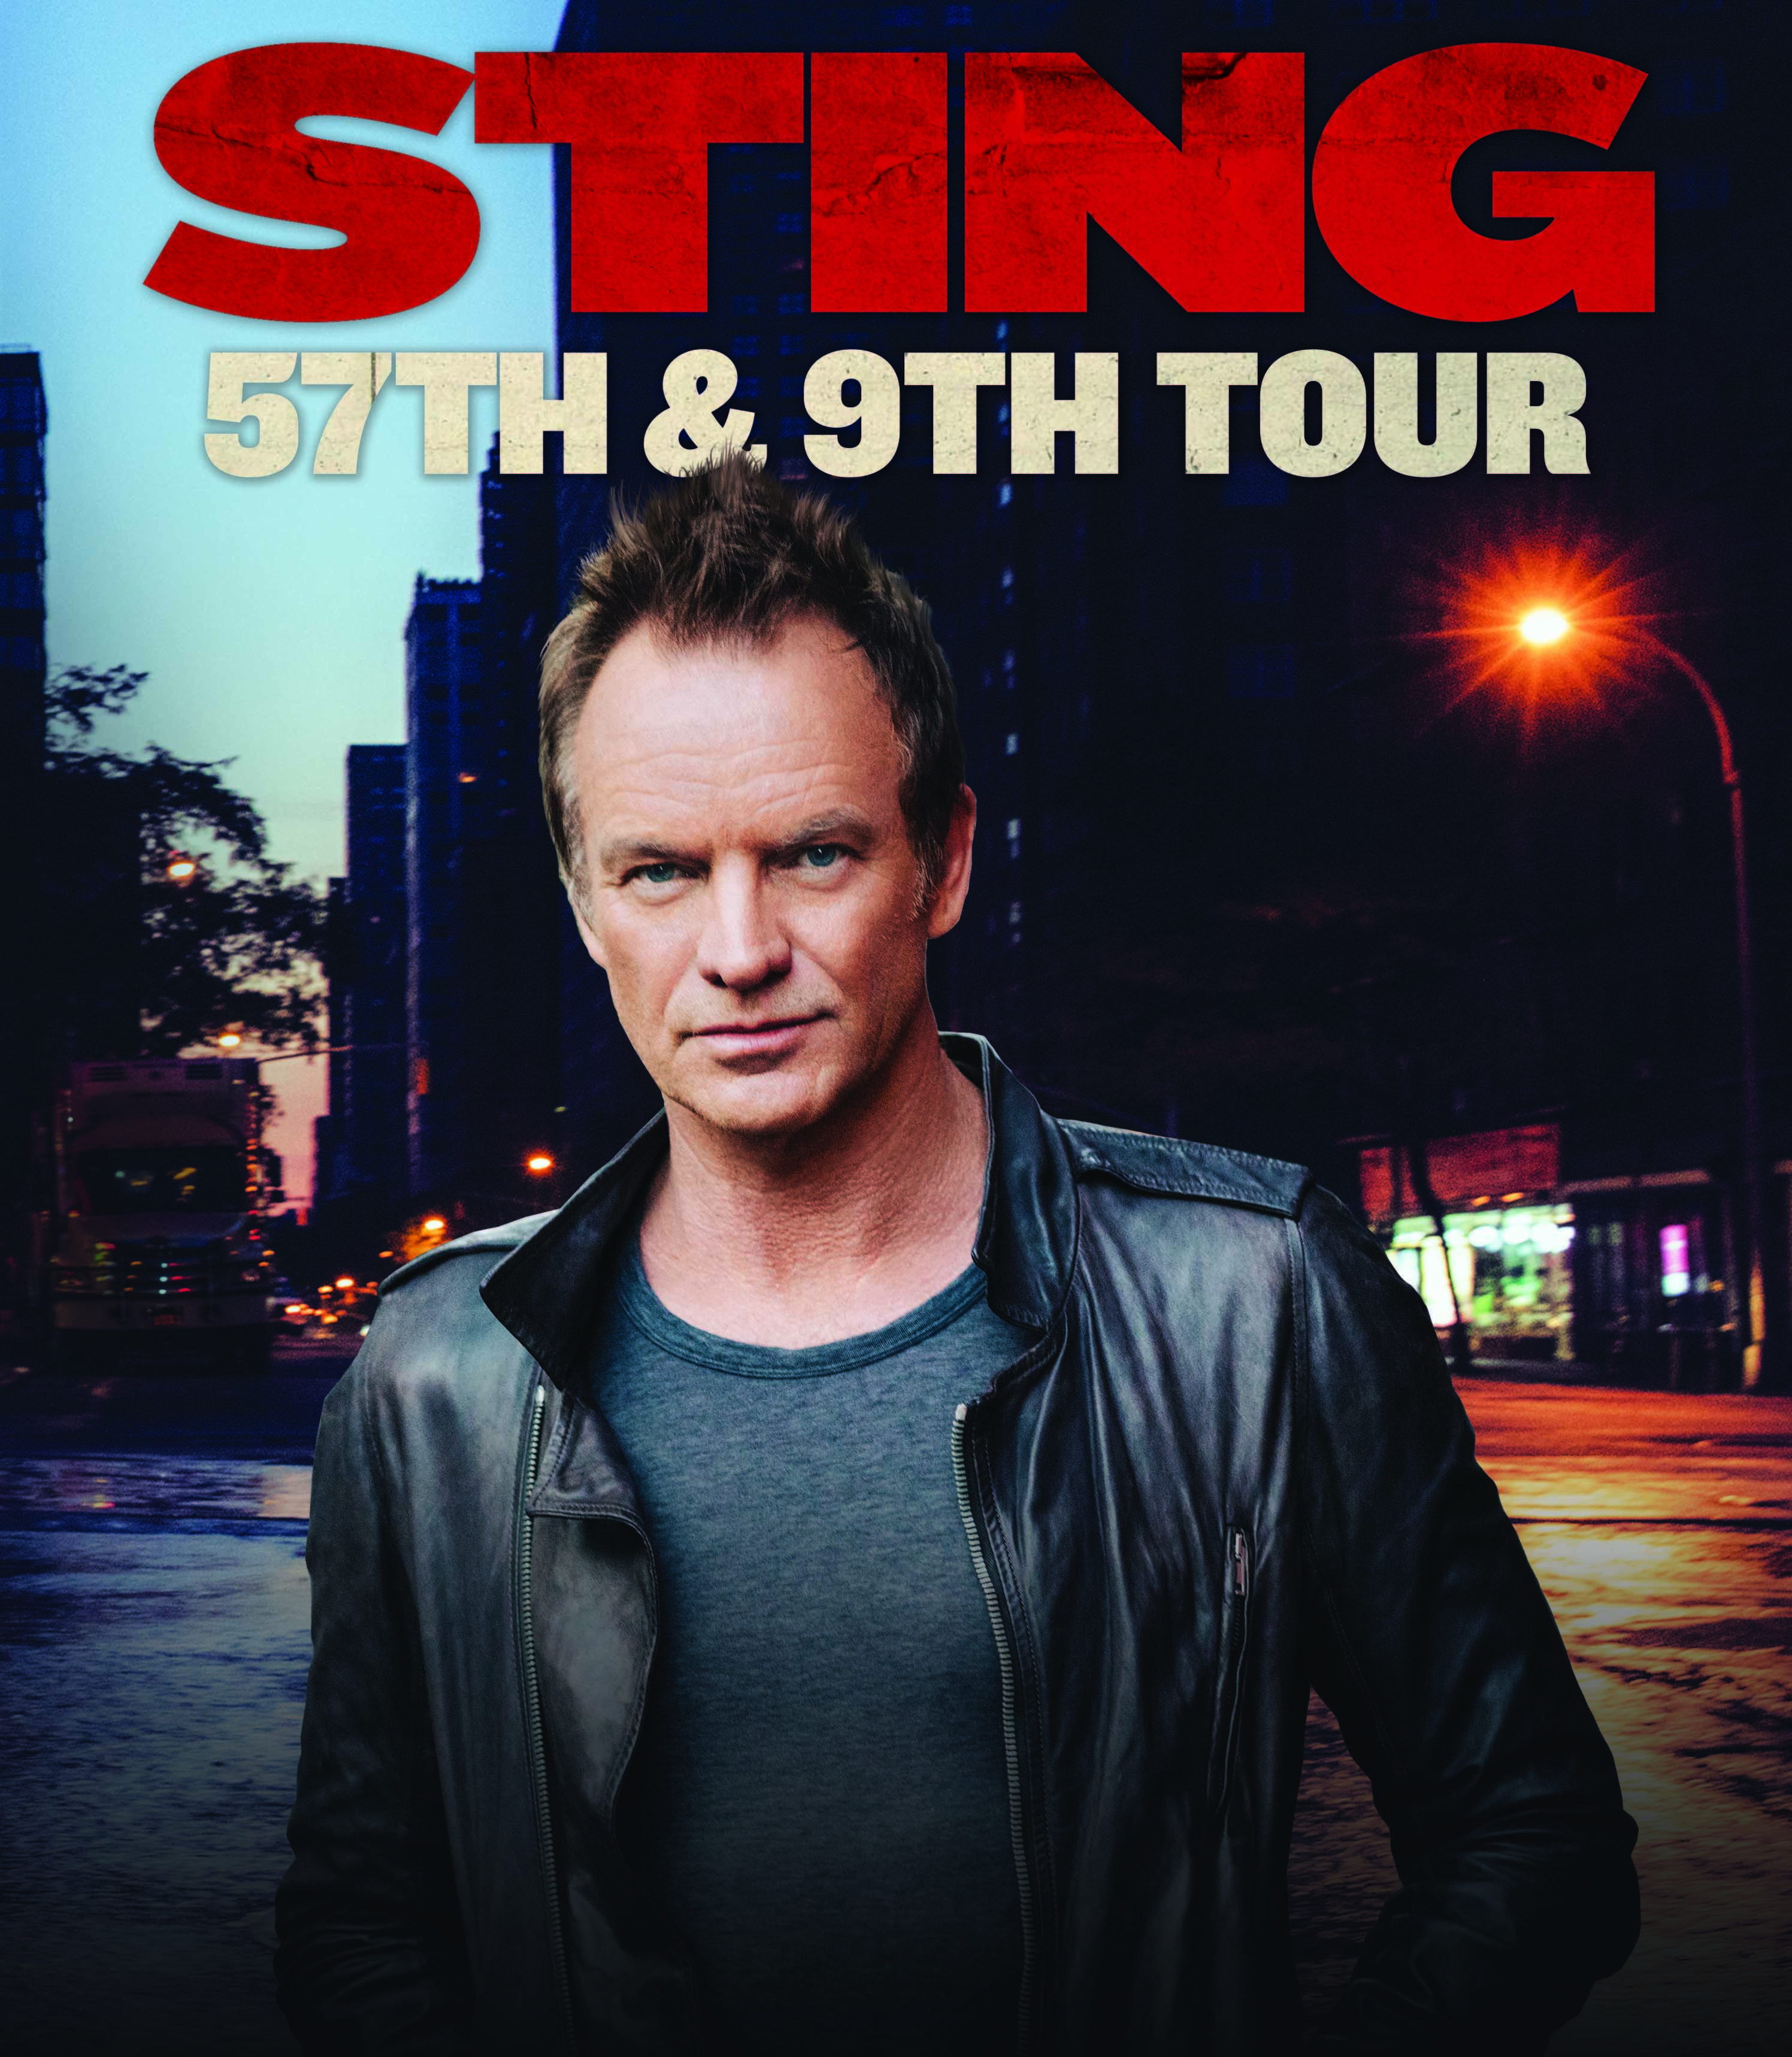 STING
57TH & 9TH TOUR

WITH SPECIAL GUEST JOE SUMNER